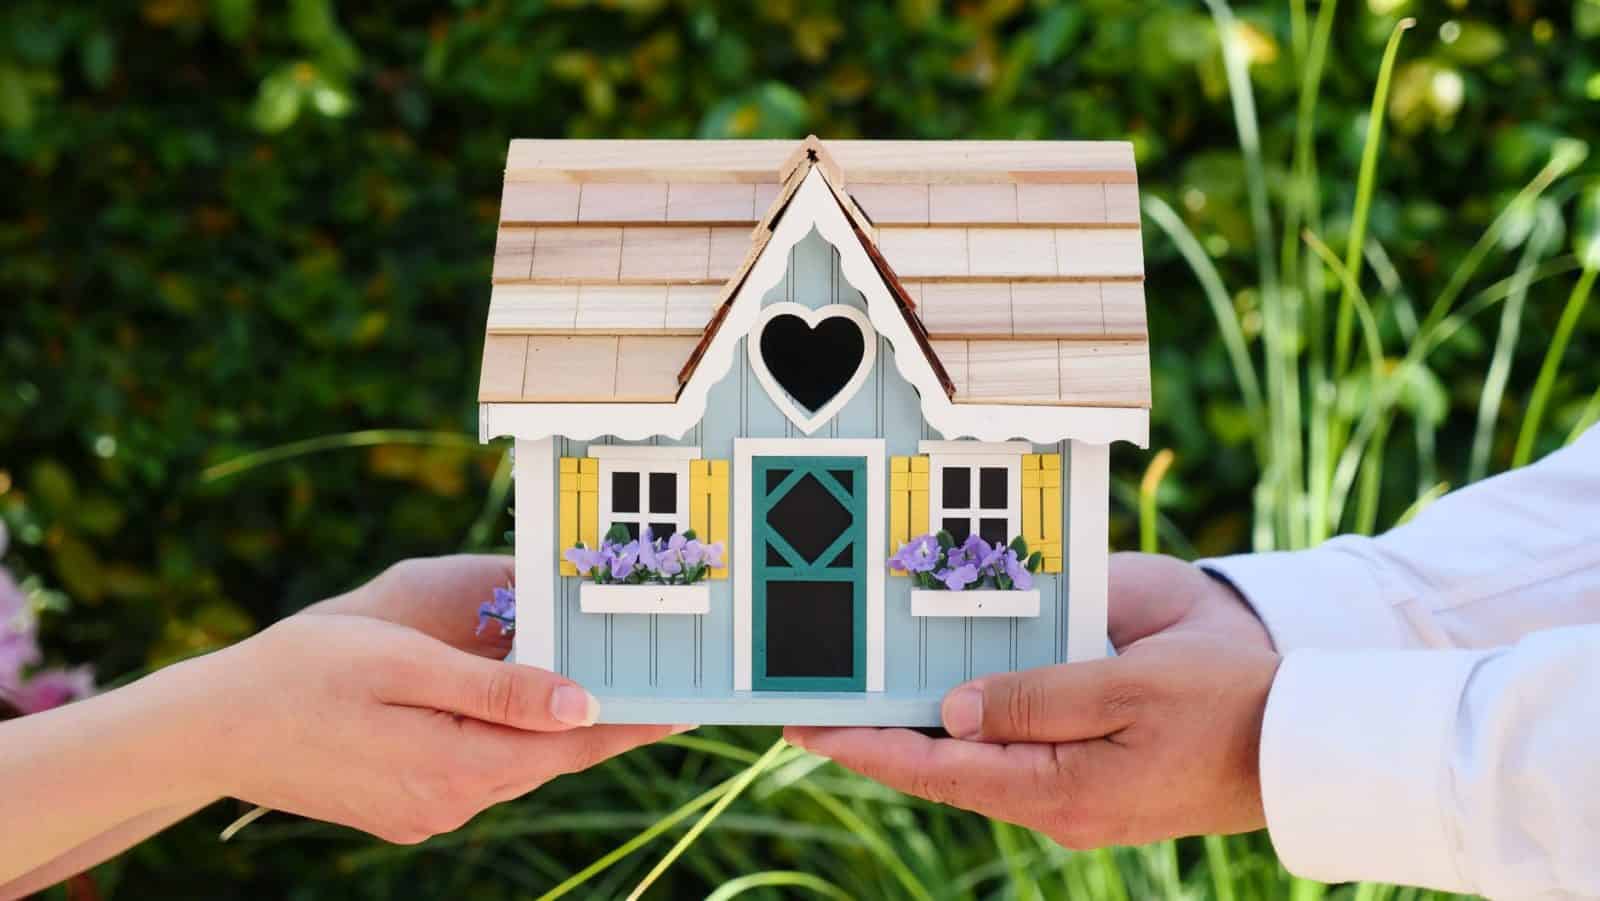 Two pairs of hands holding a small wooden house in their palms